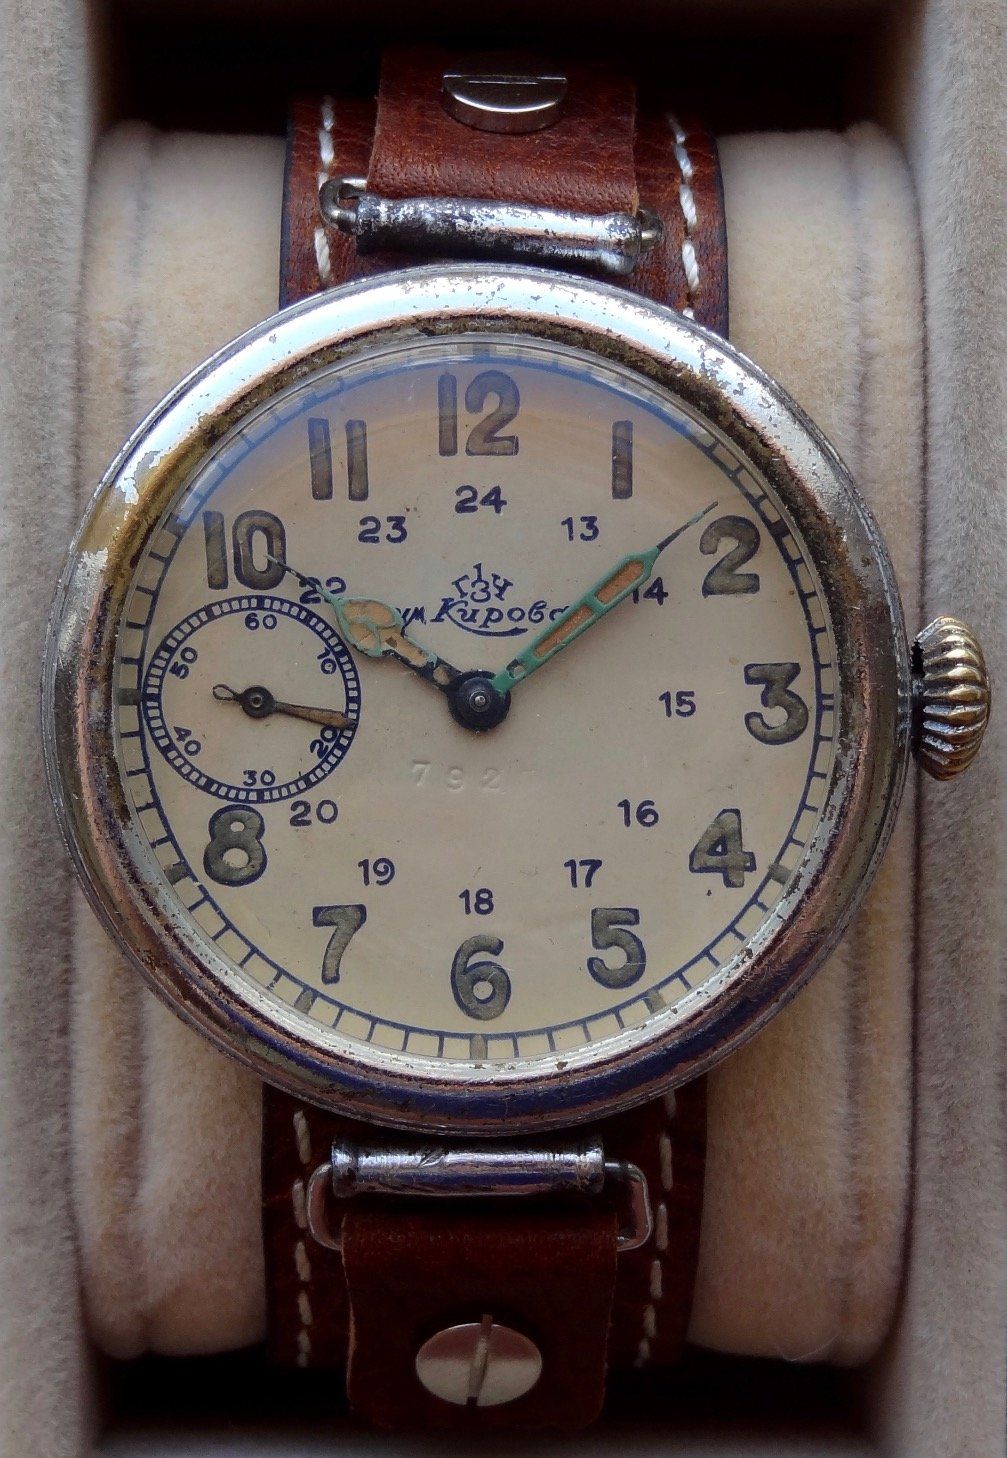 Kirova K-43 derived from Size 16 movement (Courtesy: Dashiell Stanford; https://mroatman.wixsite.com/watches-of-the-ussr)